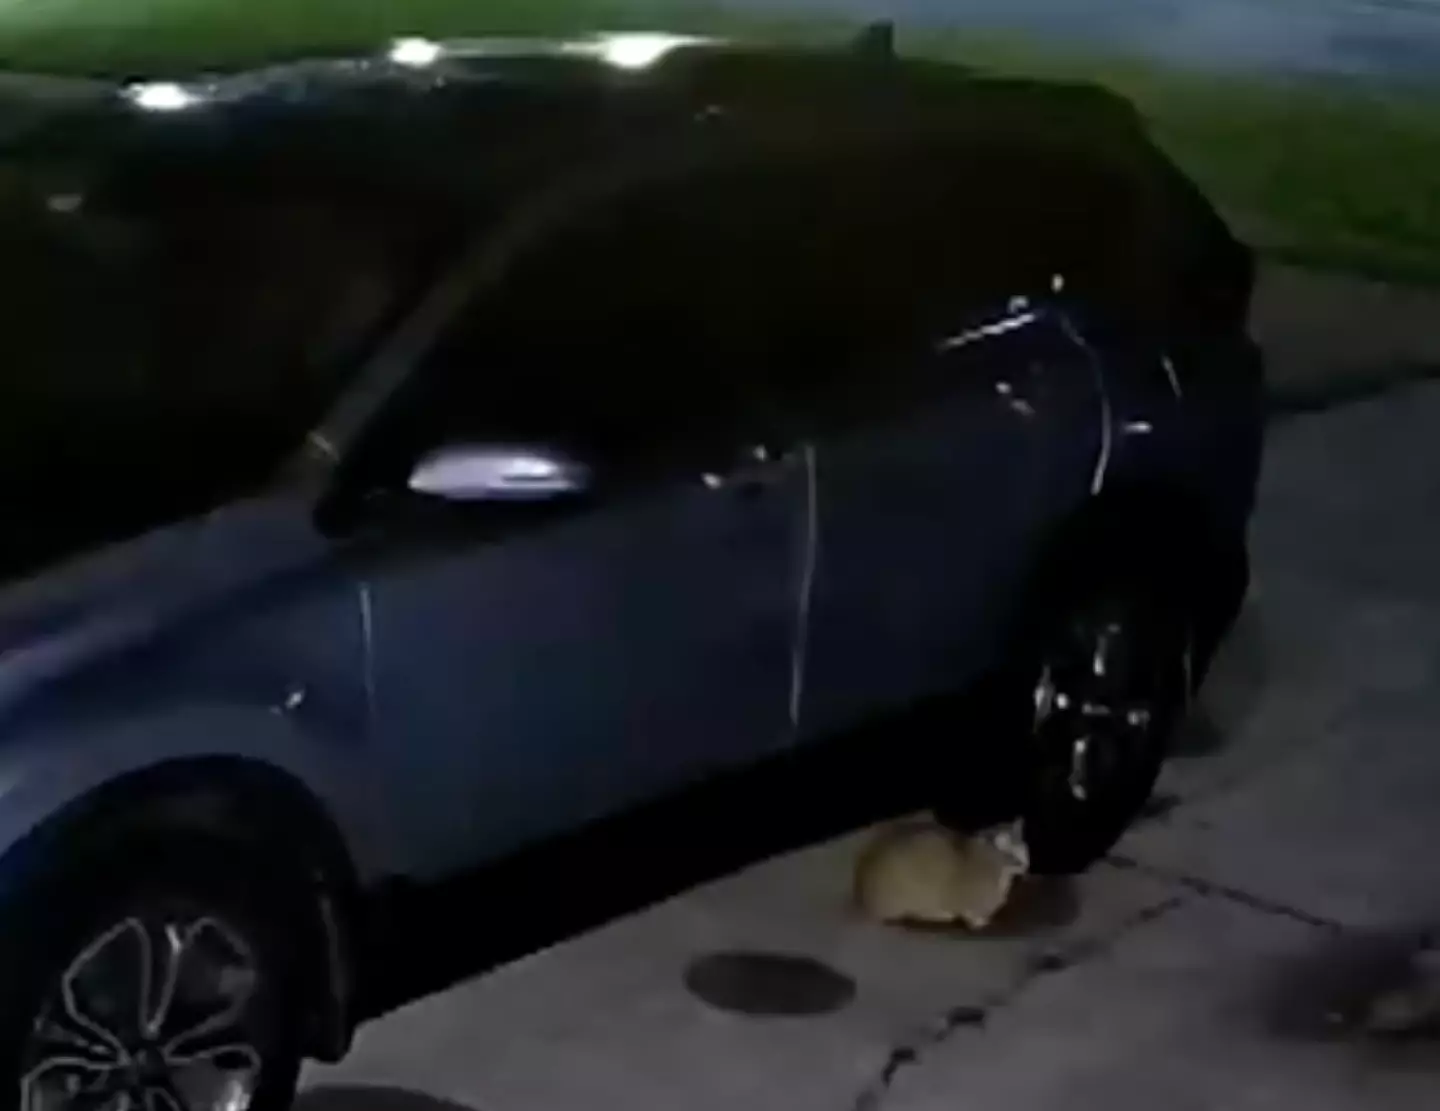 It seems the two dogs were pursuing a cat which hid in the car's engine.